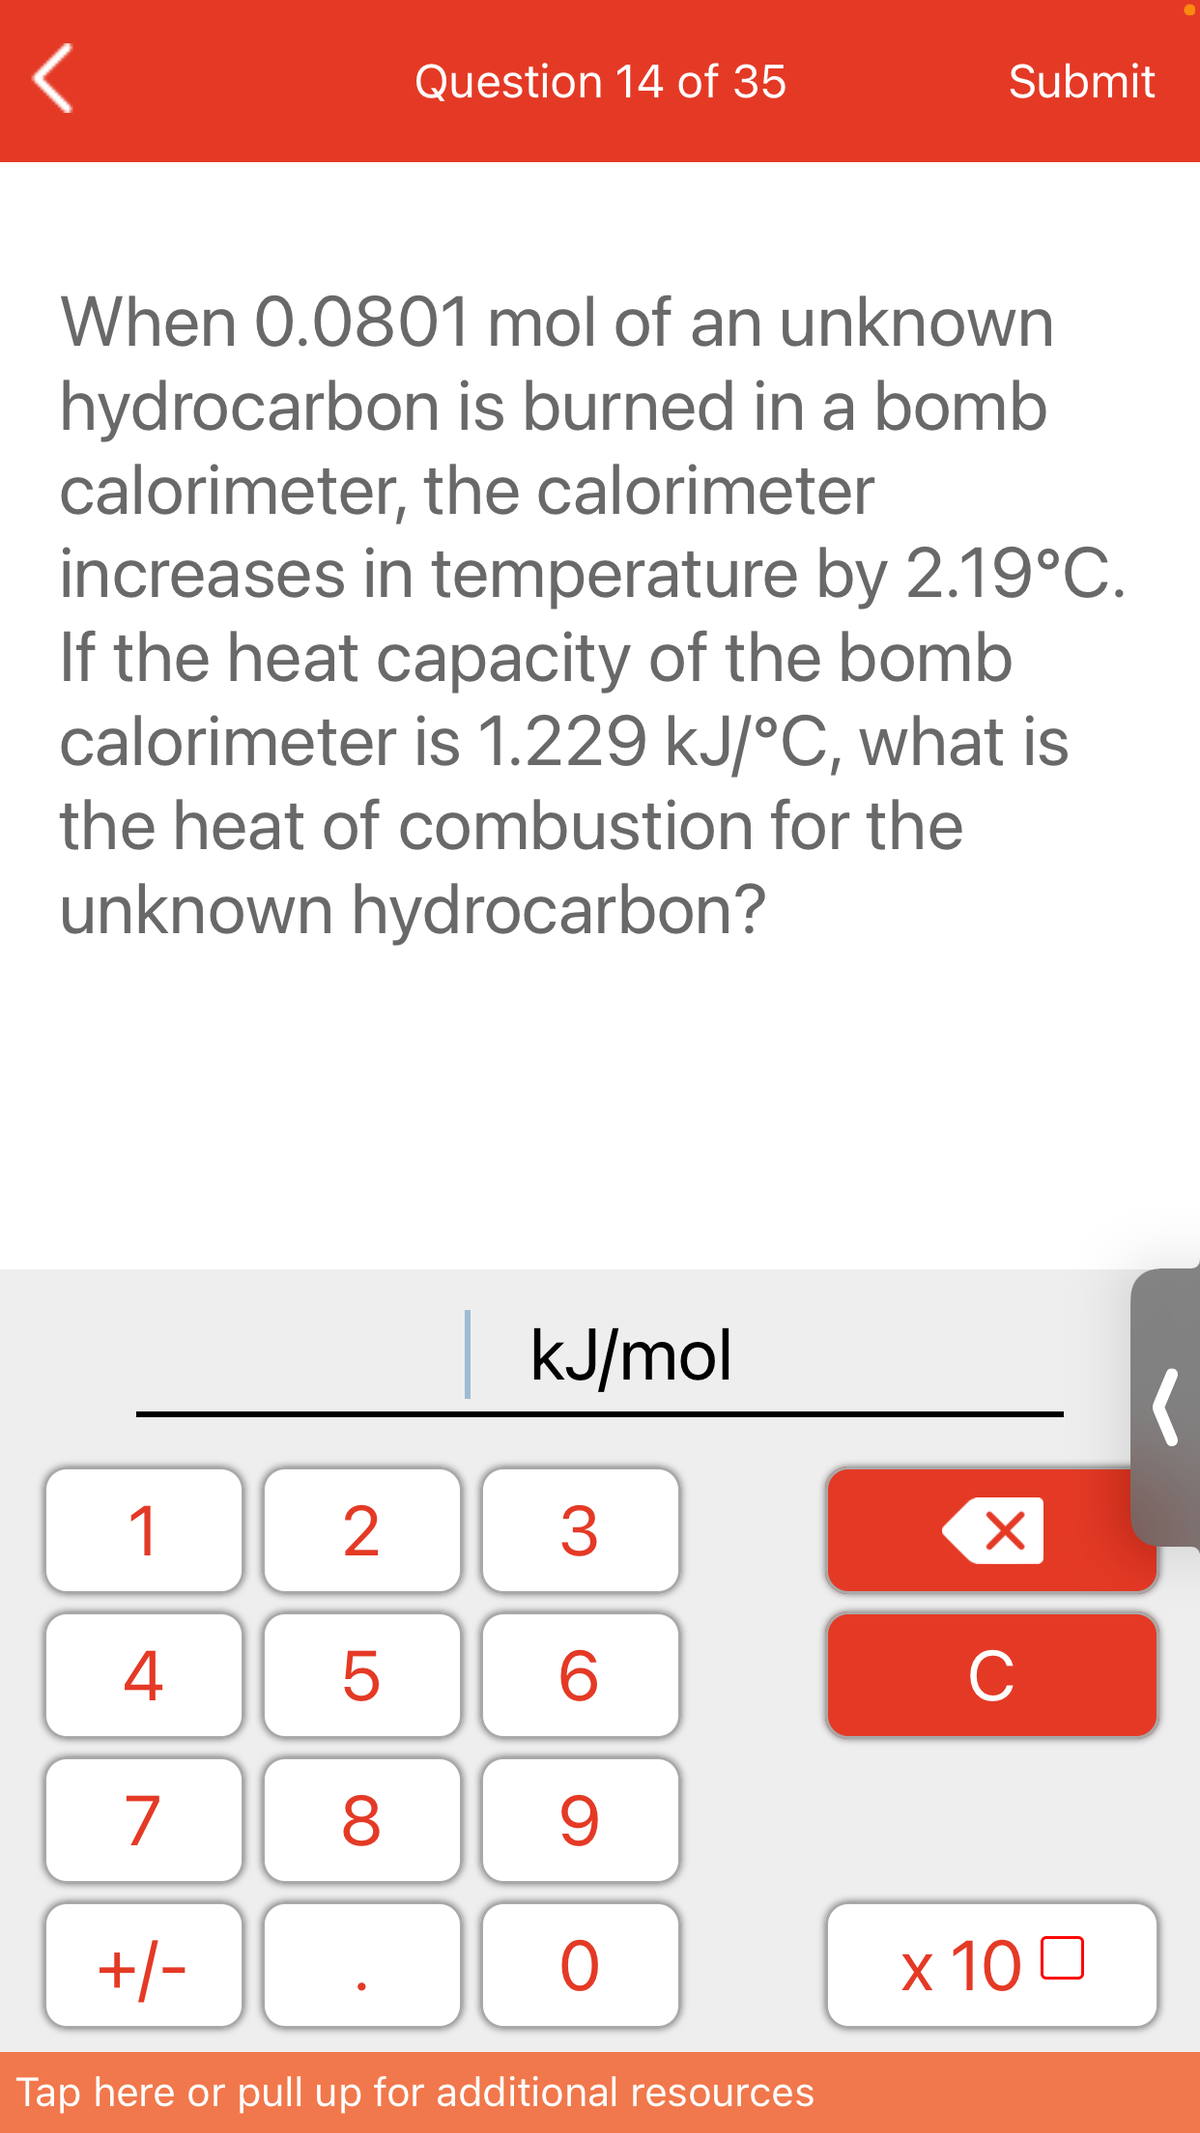 Question 14 of 35
Submit
When 0.0801 mol of an unknown
hydrocarbon is burned in a bomb
calorimeter, the calorimeter
increases in temperature by 2.19°C.
If the heat capacity of the bomb
calorimeter is 1.229 kJ/°C, what is
the heat of combustion for the
unknown hydrocarbon?
kJ/mol
1
4
C
7
+/-
x 10 0
Tap here or pull up for additional resources
LO
00
